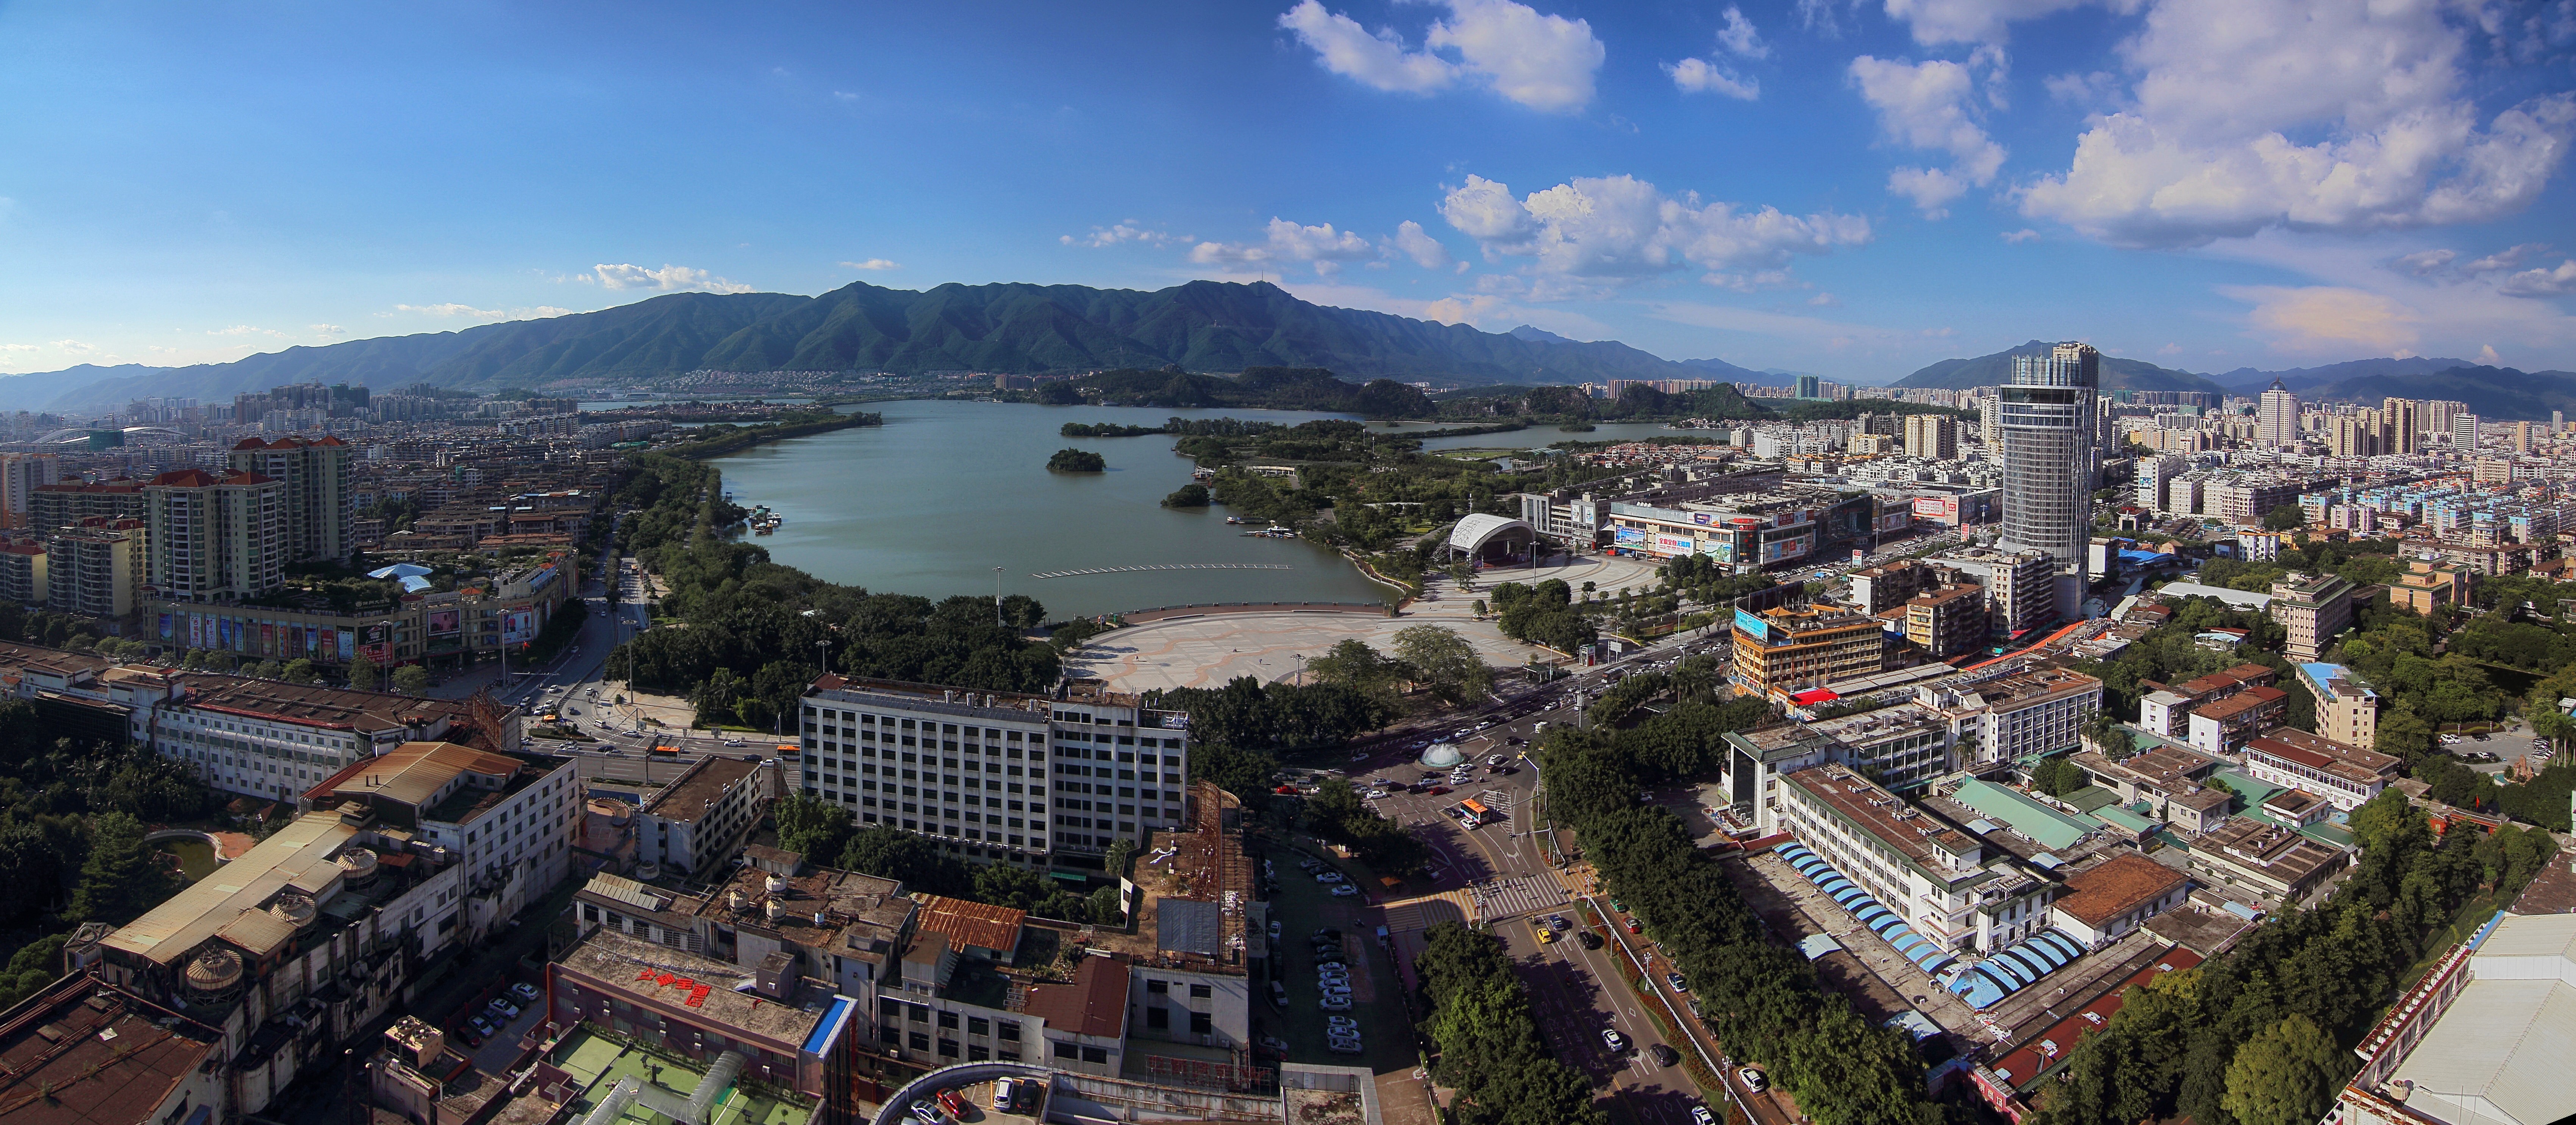 Zhaoqing is one of the most picturesque cities in the Greater Bay Area. Photo: Shutterstock